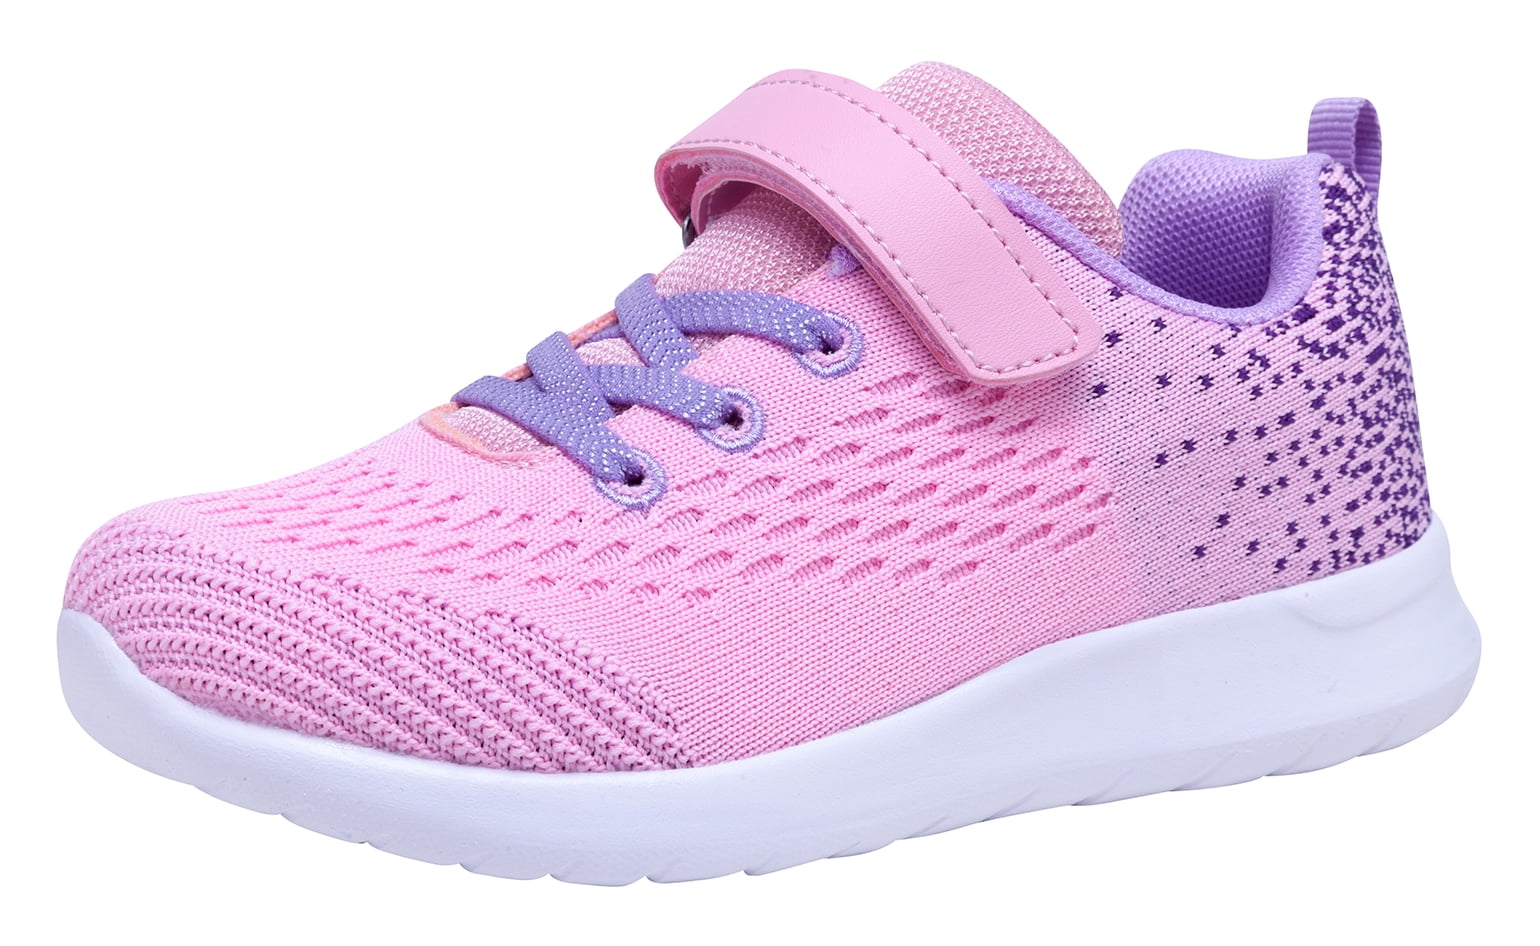 NEWMALL Toddle Kid Girl Breathable Mesh Casual Athletic Sneaker, Sizes ...